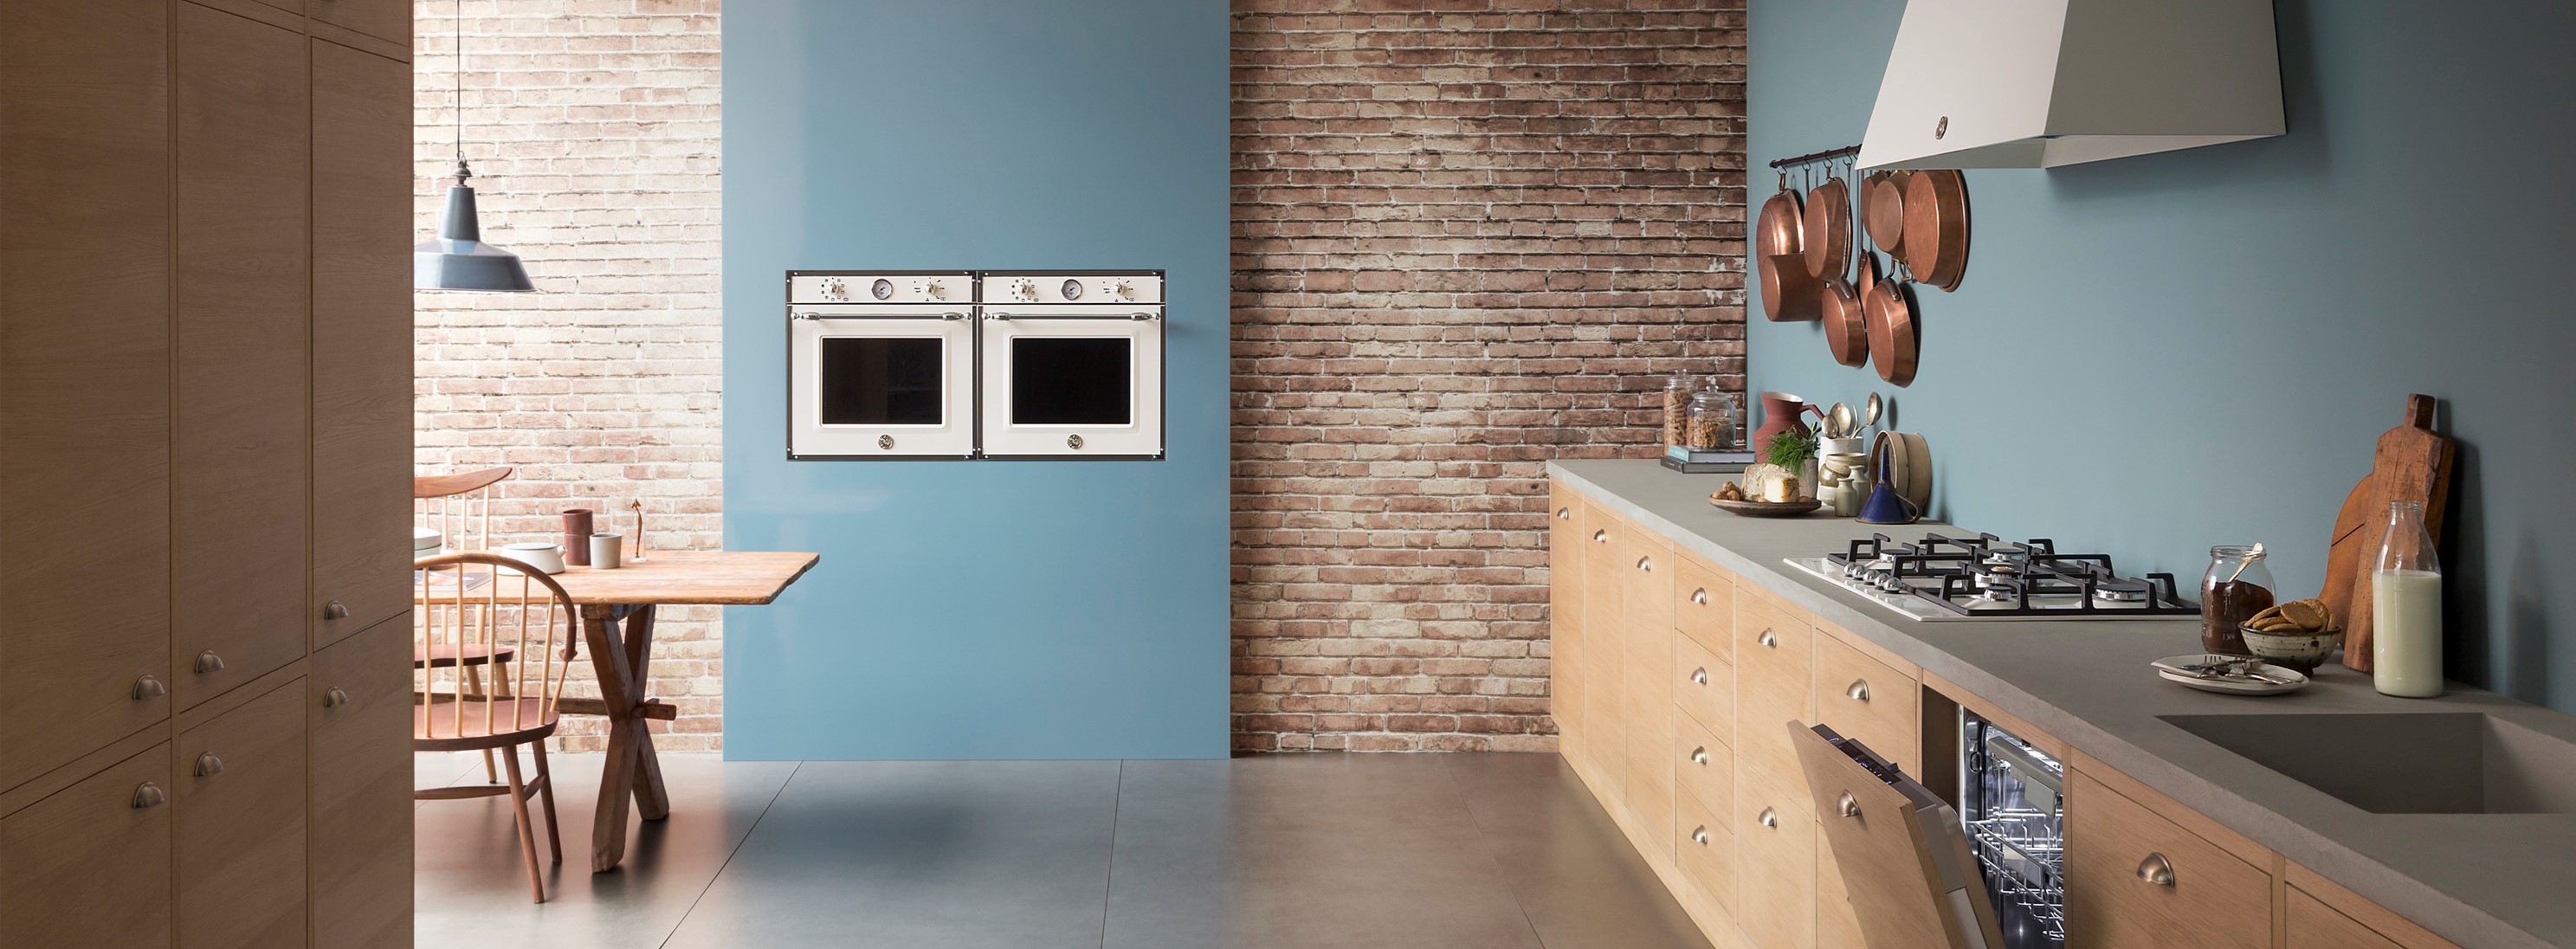 Ranges, Ovens and Cooktops Bertazzoni 3